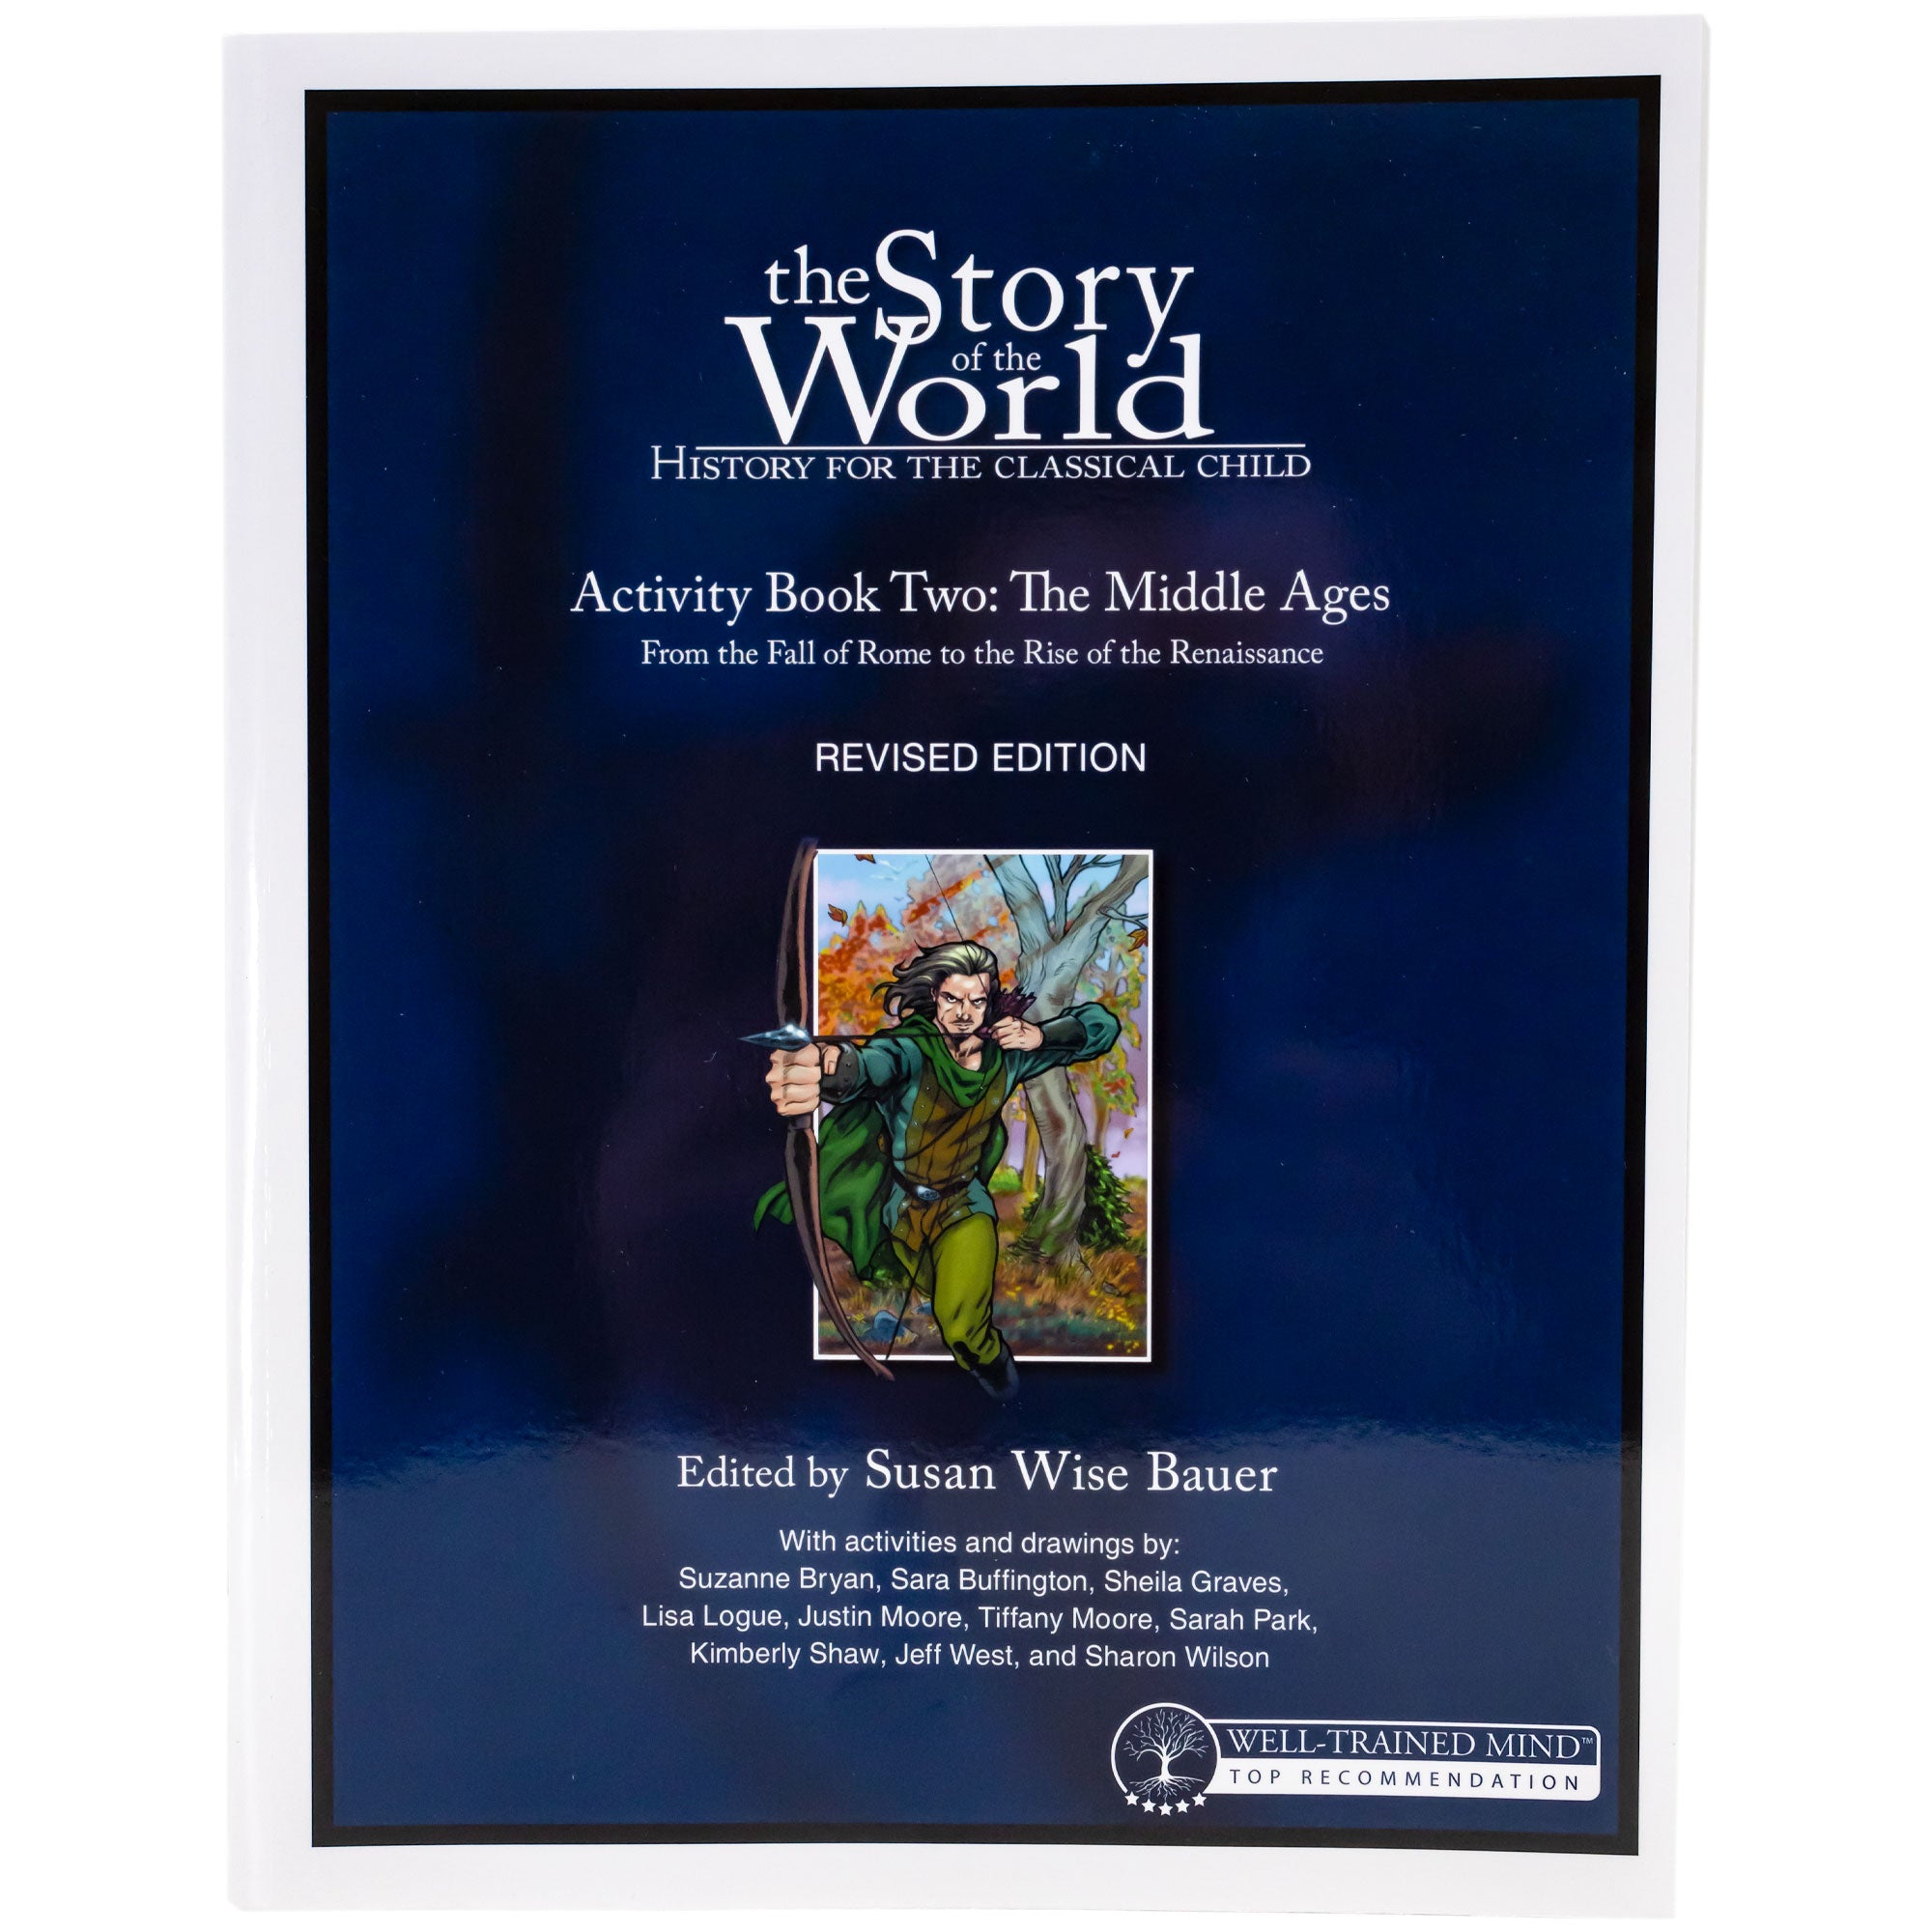 The Story of the World 1 Activity book cover. The cover is mainly blue with a black bottom and a small illustration in the middle. The illustration is of Robin Hood in a forest pulling back on a bow, in the process of shooting an arrow. He is wearing a green outfit and cape.  The white text reads “The Story of the World. History for the classical child. Activity Book 2, The Middle Ages. From the Fall of Rome to the Rise of the Renaissance. Revised Edition. Edited by Susan Wise Bauer.”